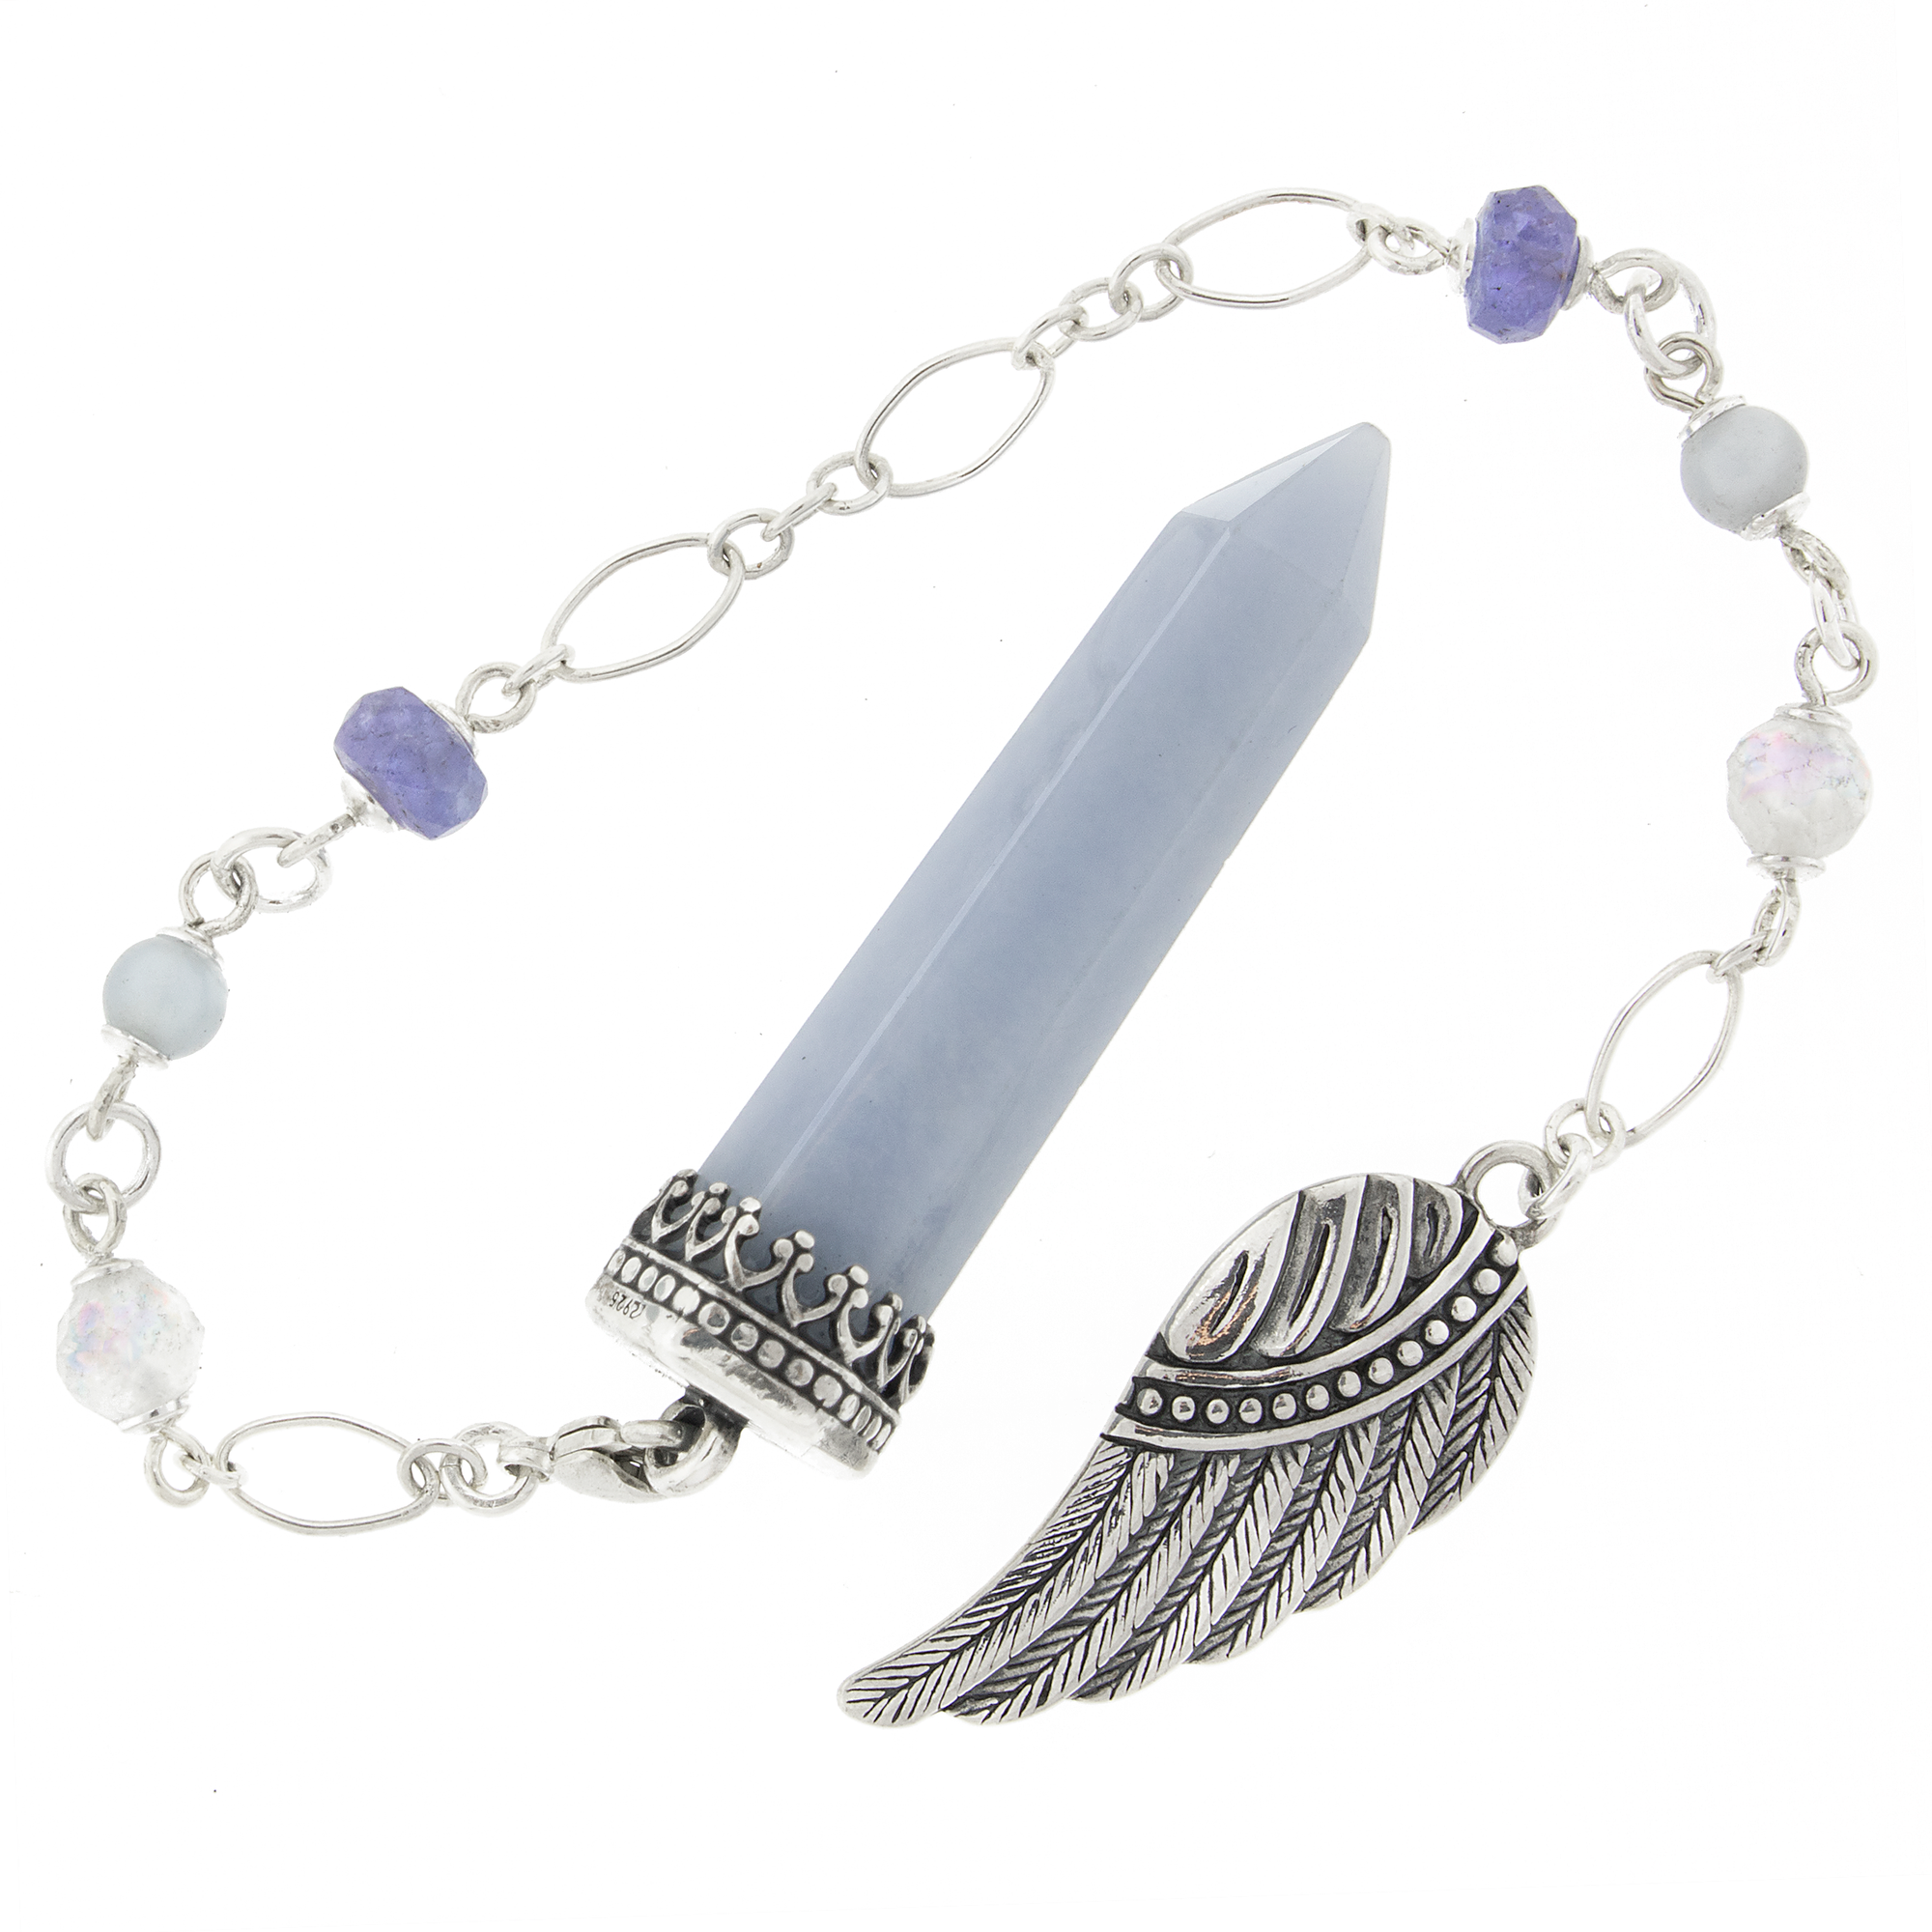 One of a Kind #381 - Angelite, Tanzanite, Rainbow Moonstone and Sterling Silver Pendulum by Ask Your Pendulum